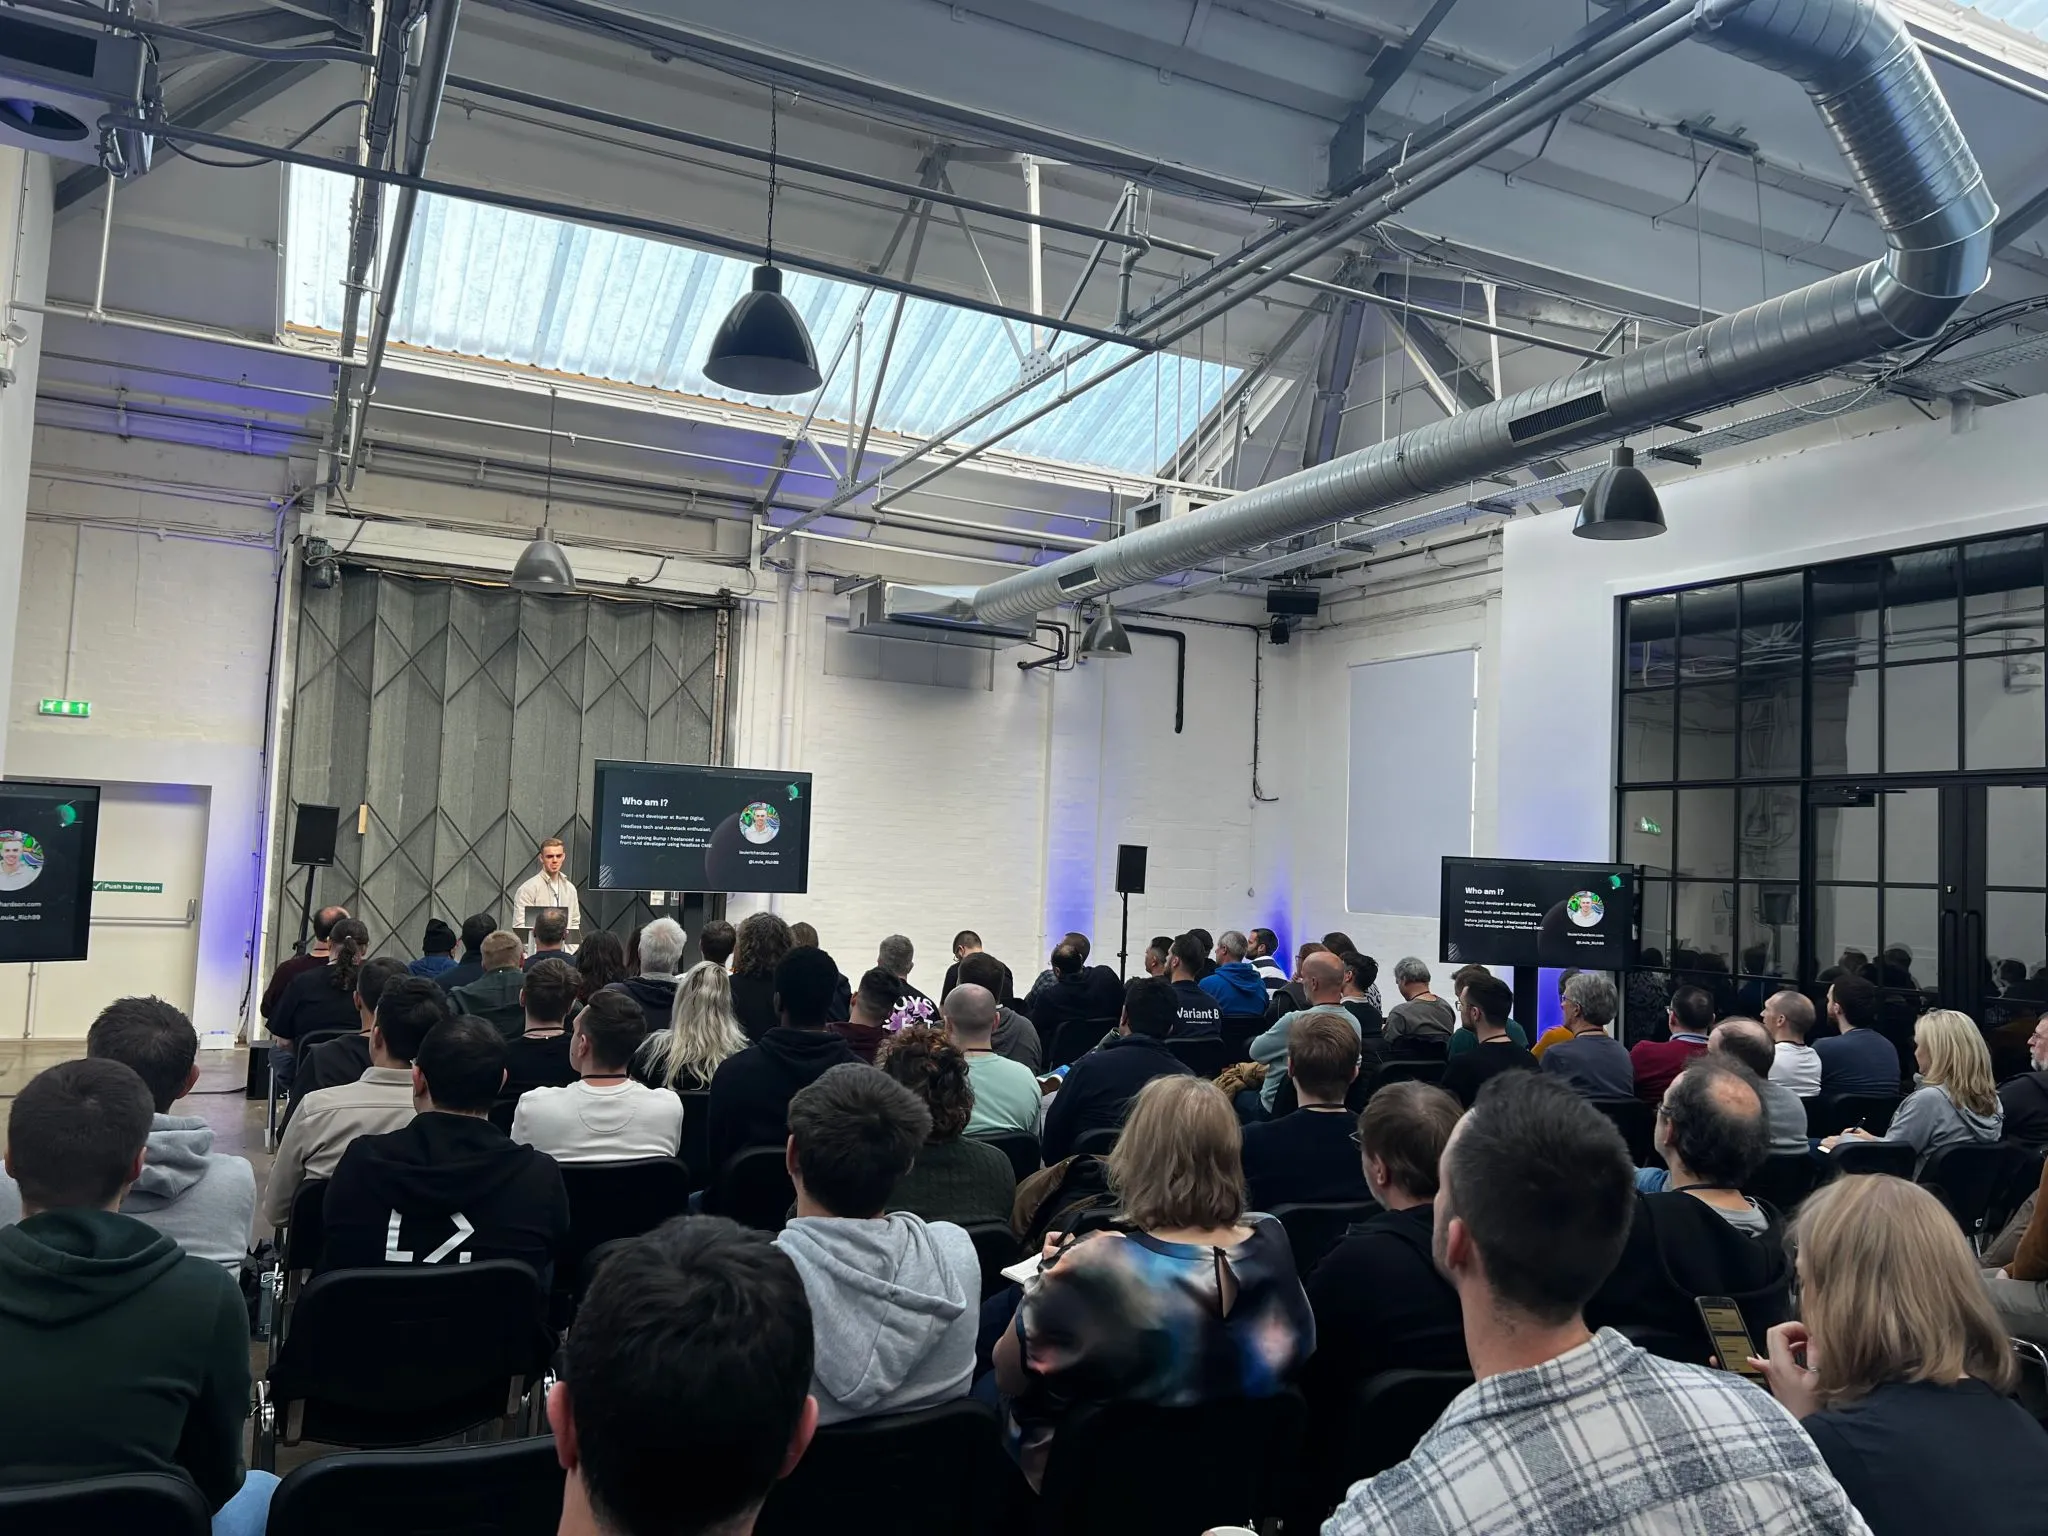 Louie speaking in front of a crowd at Umbraco UK Festival